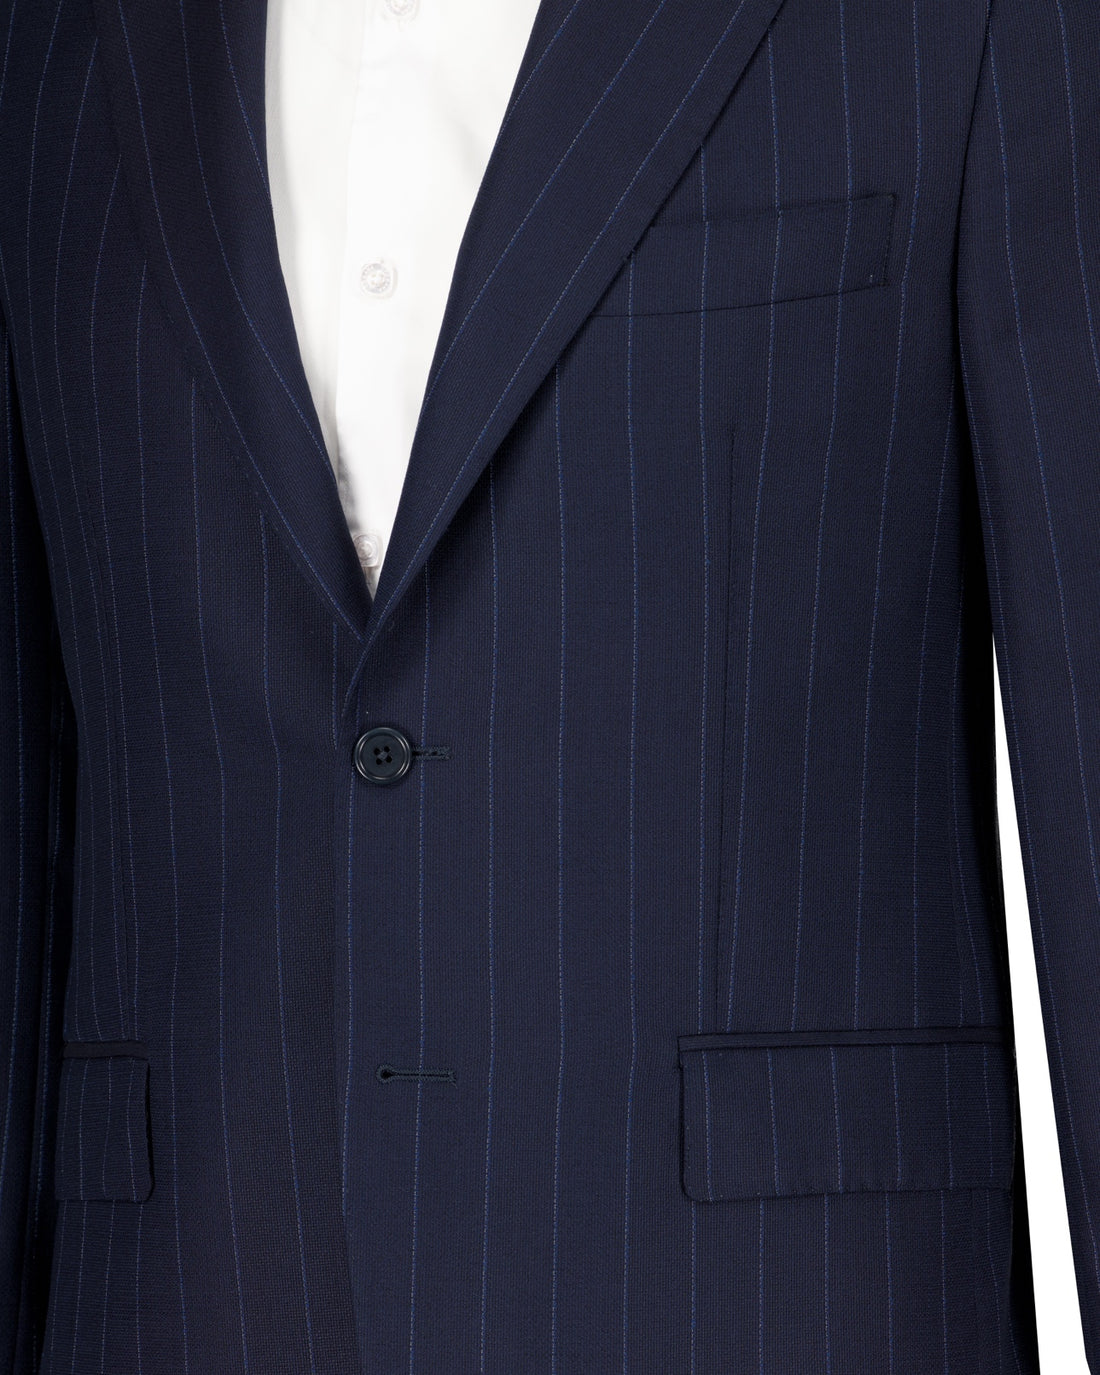 Corleone Zegna Cloth Suit - Navy - Made in Italy